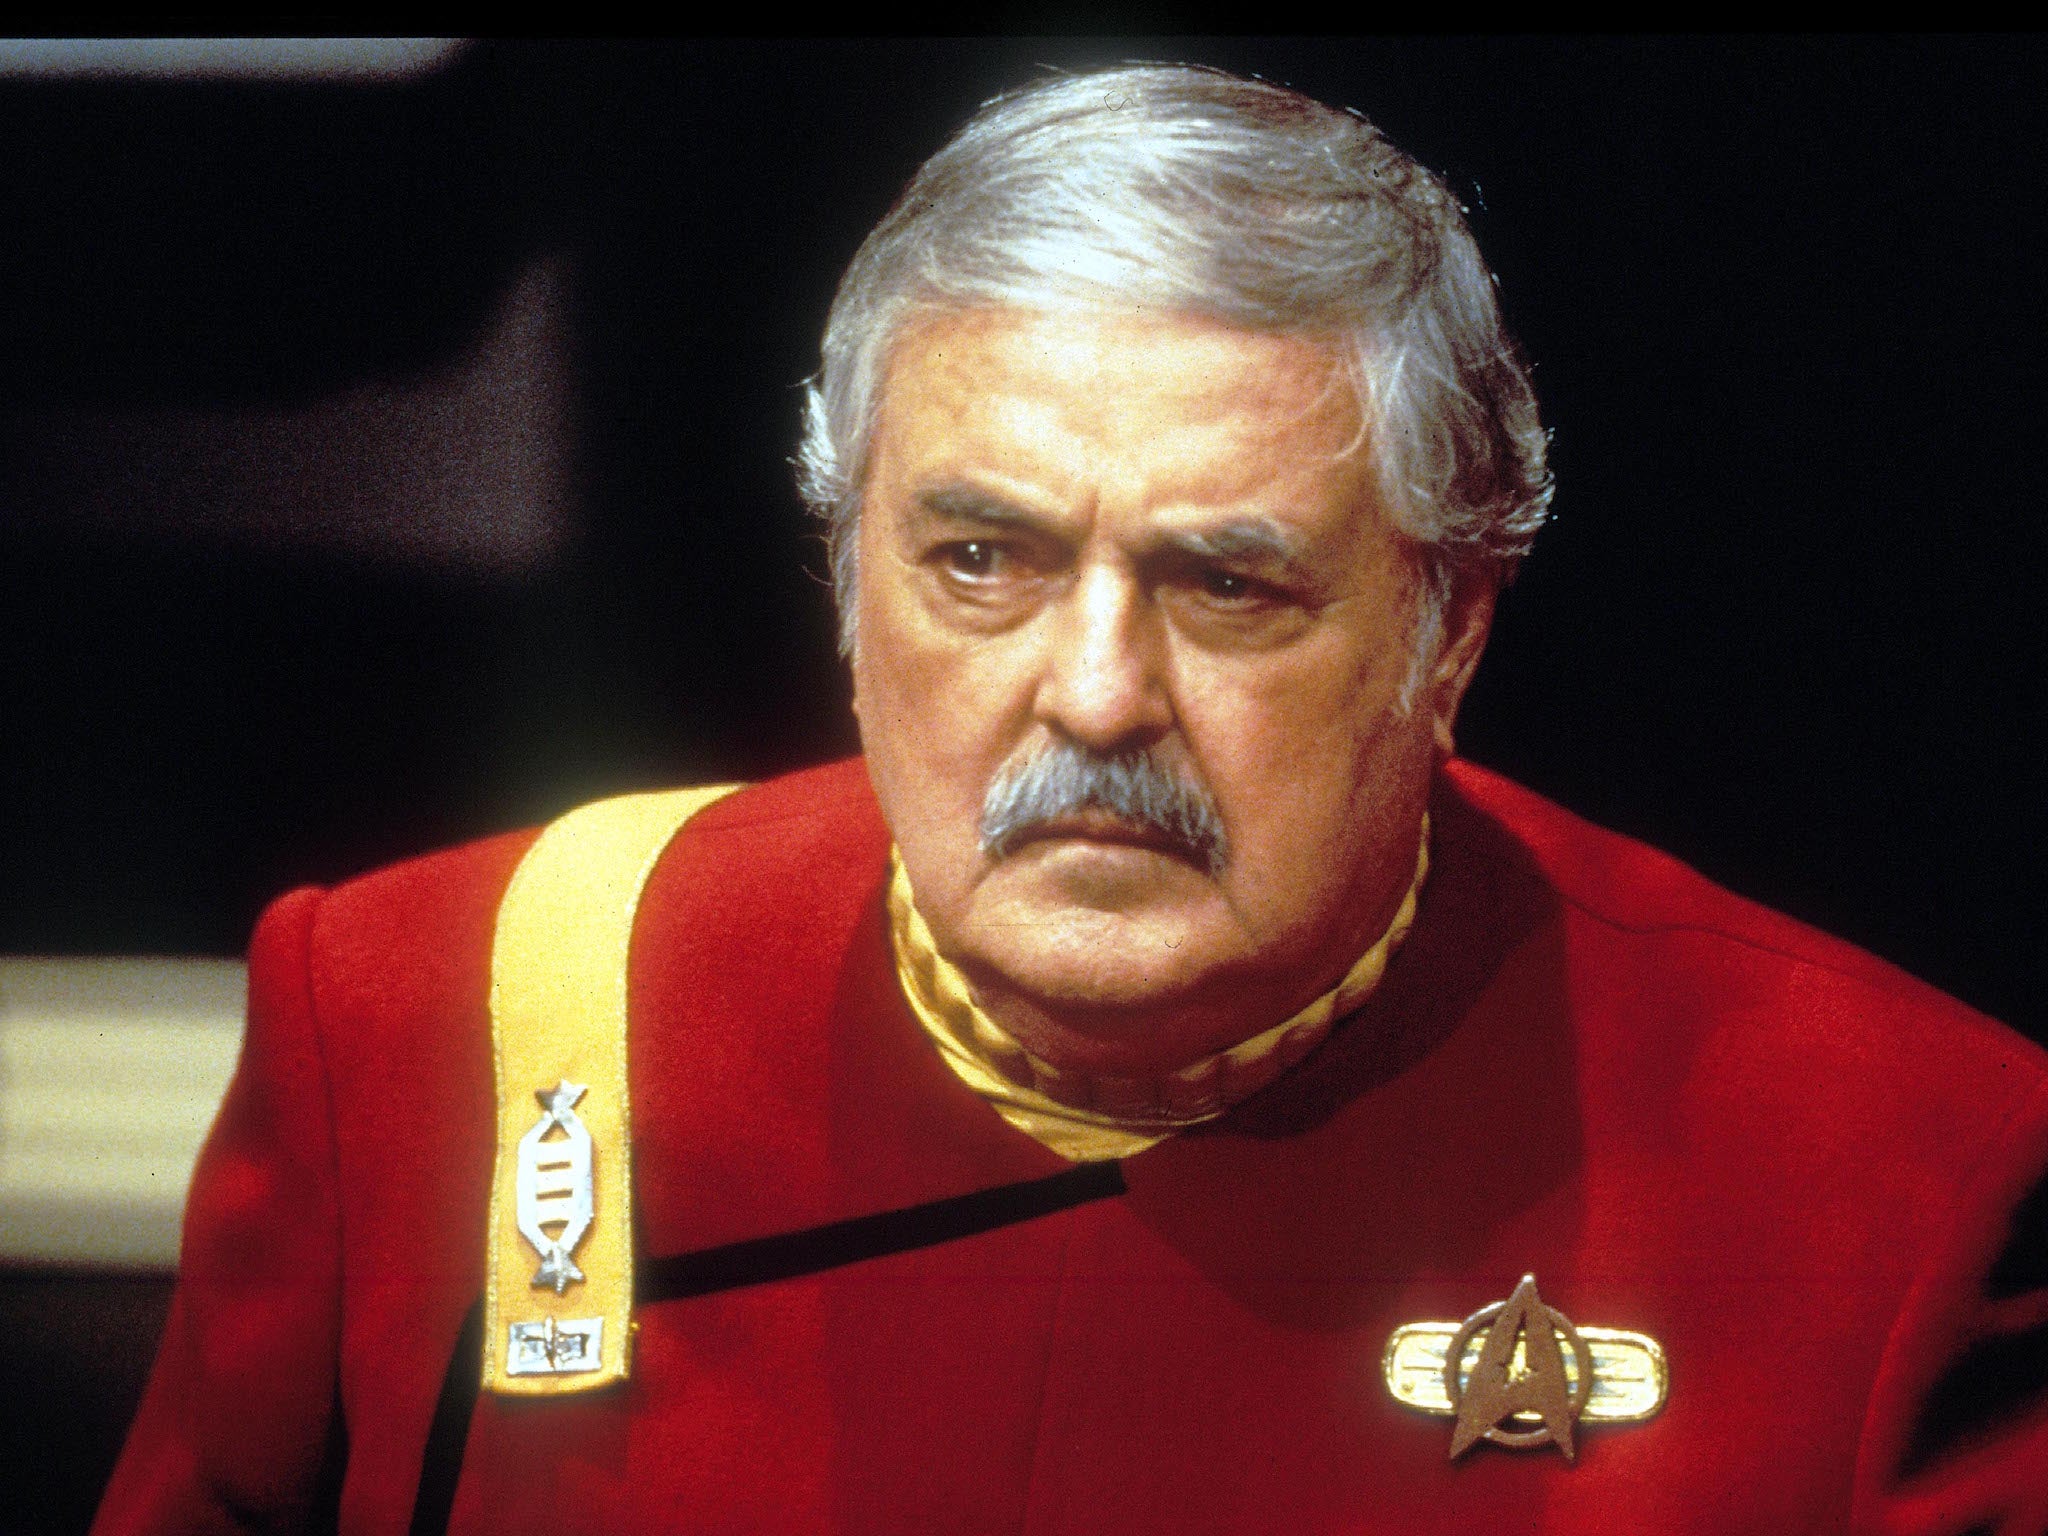 Ashes of Star Trek 'Scotty' actor James Doohan smuggled aboard the  International Space Station: 'He always wanted to go to space